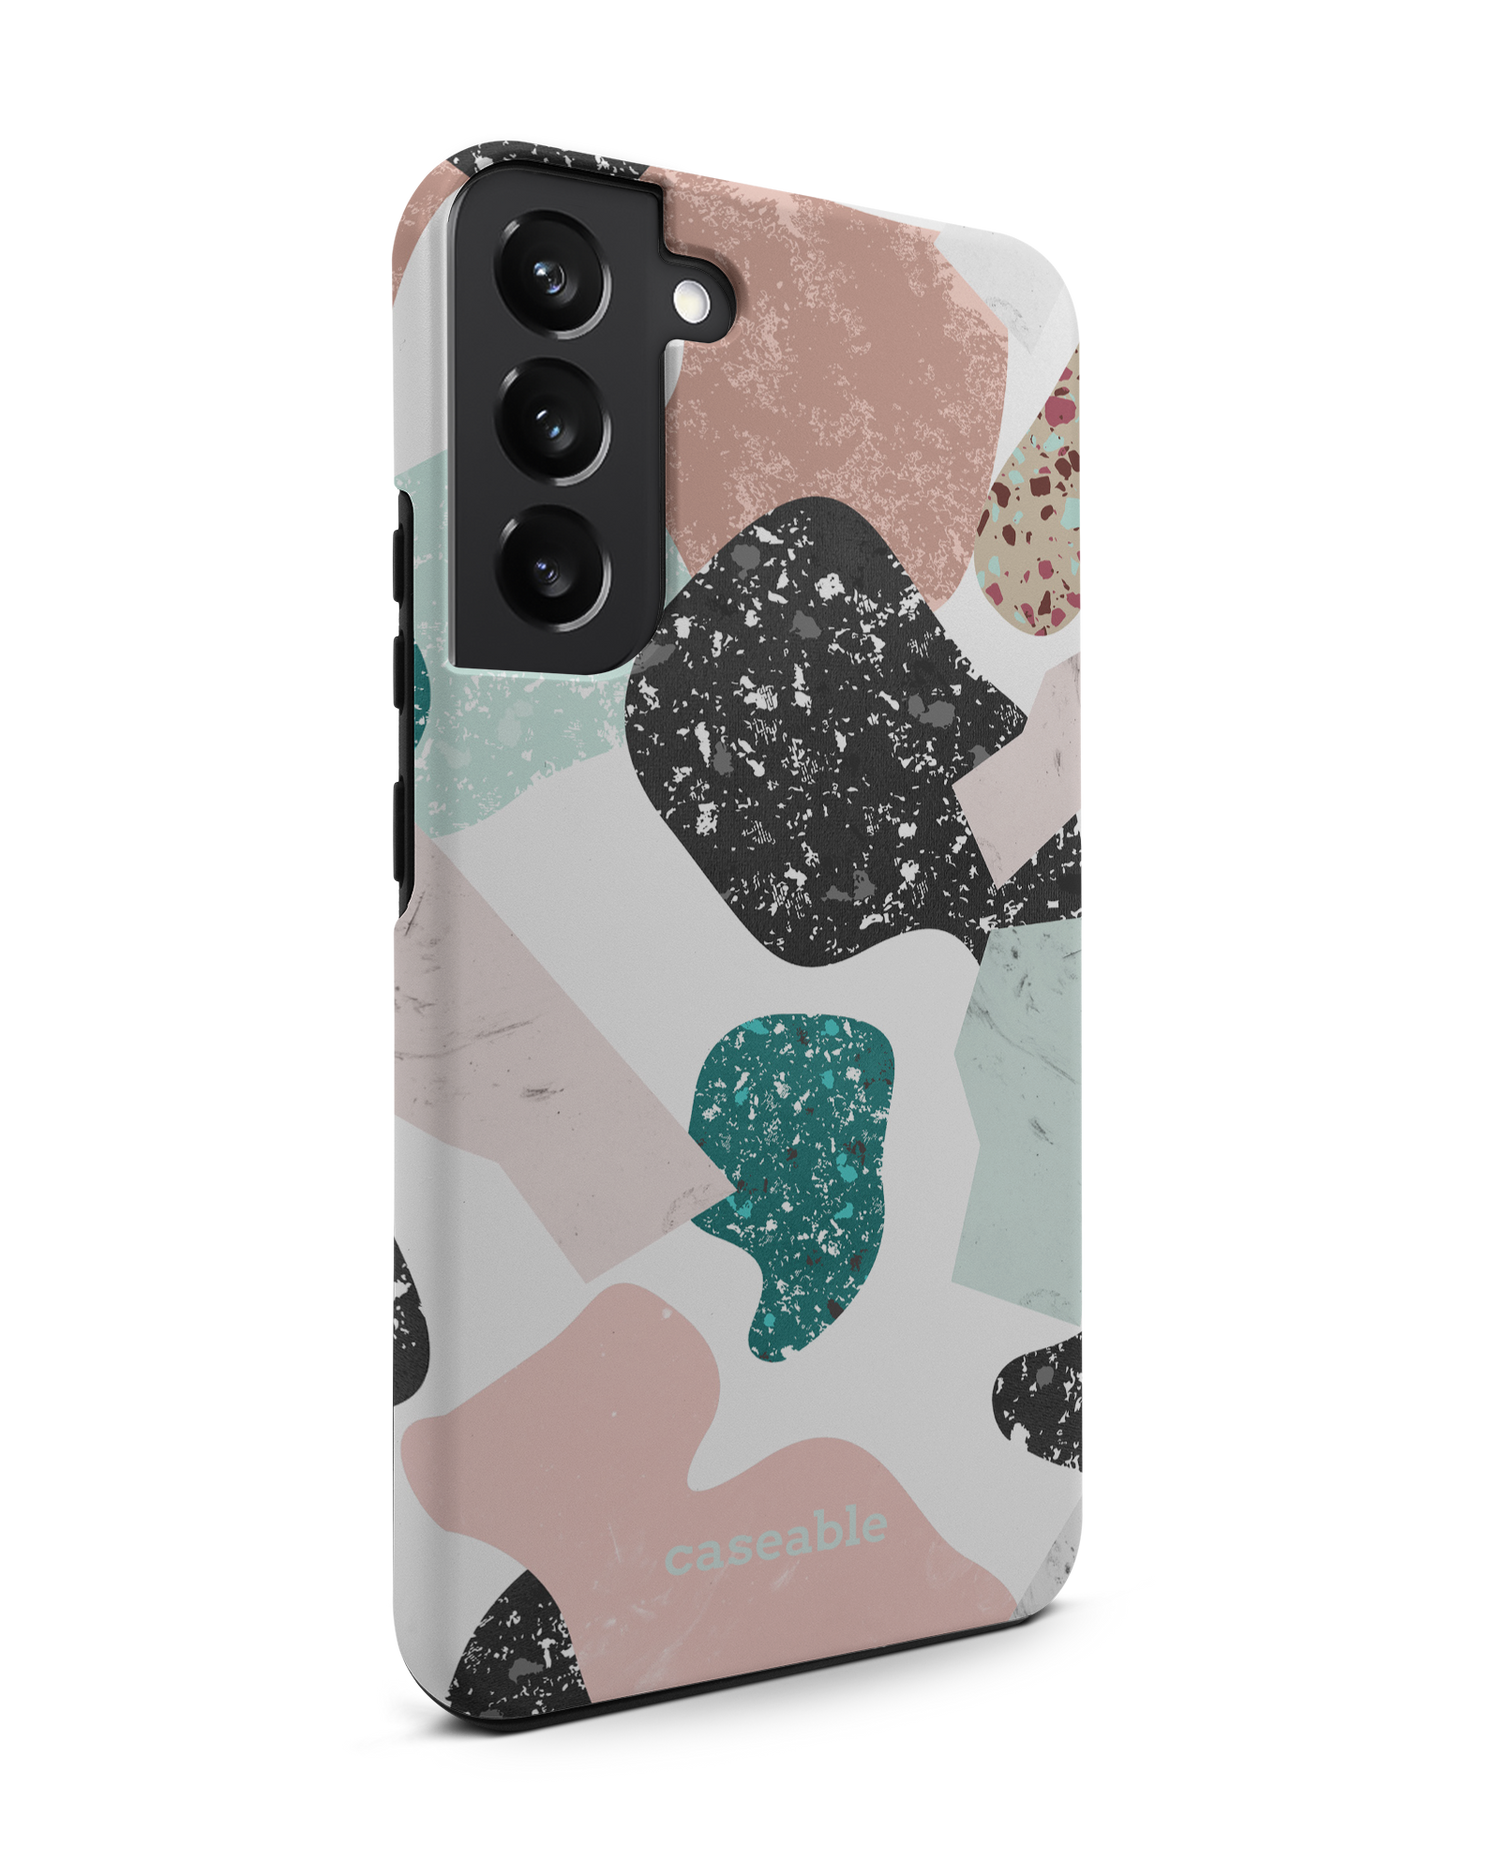 Scattered Shapes Premium Phone Case Samsung Galaxy S22 Plus 5G: View from the left side